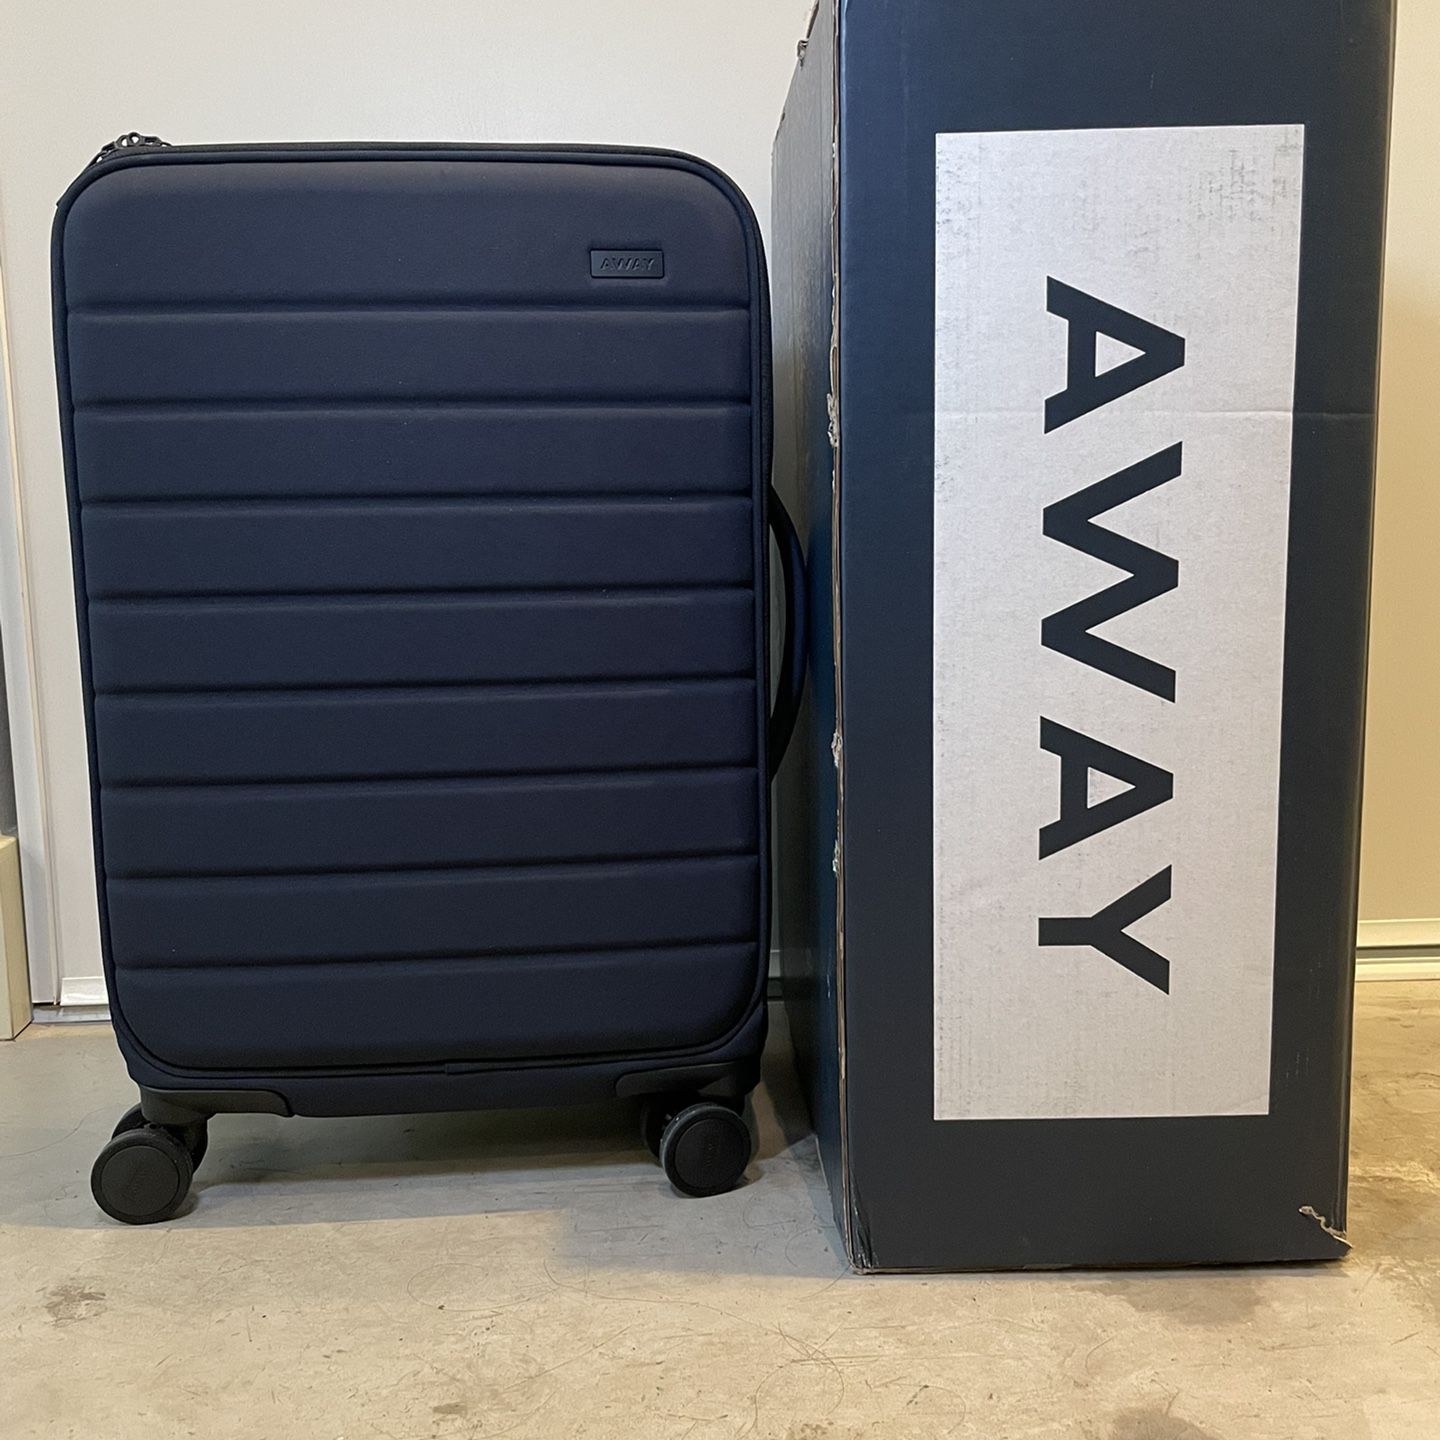 Away Luggage Carry On + Everywhere Bag Beige Sand Tan NEW With Boxes for  Sale in Tempe, AZ - OfferUp